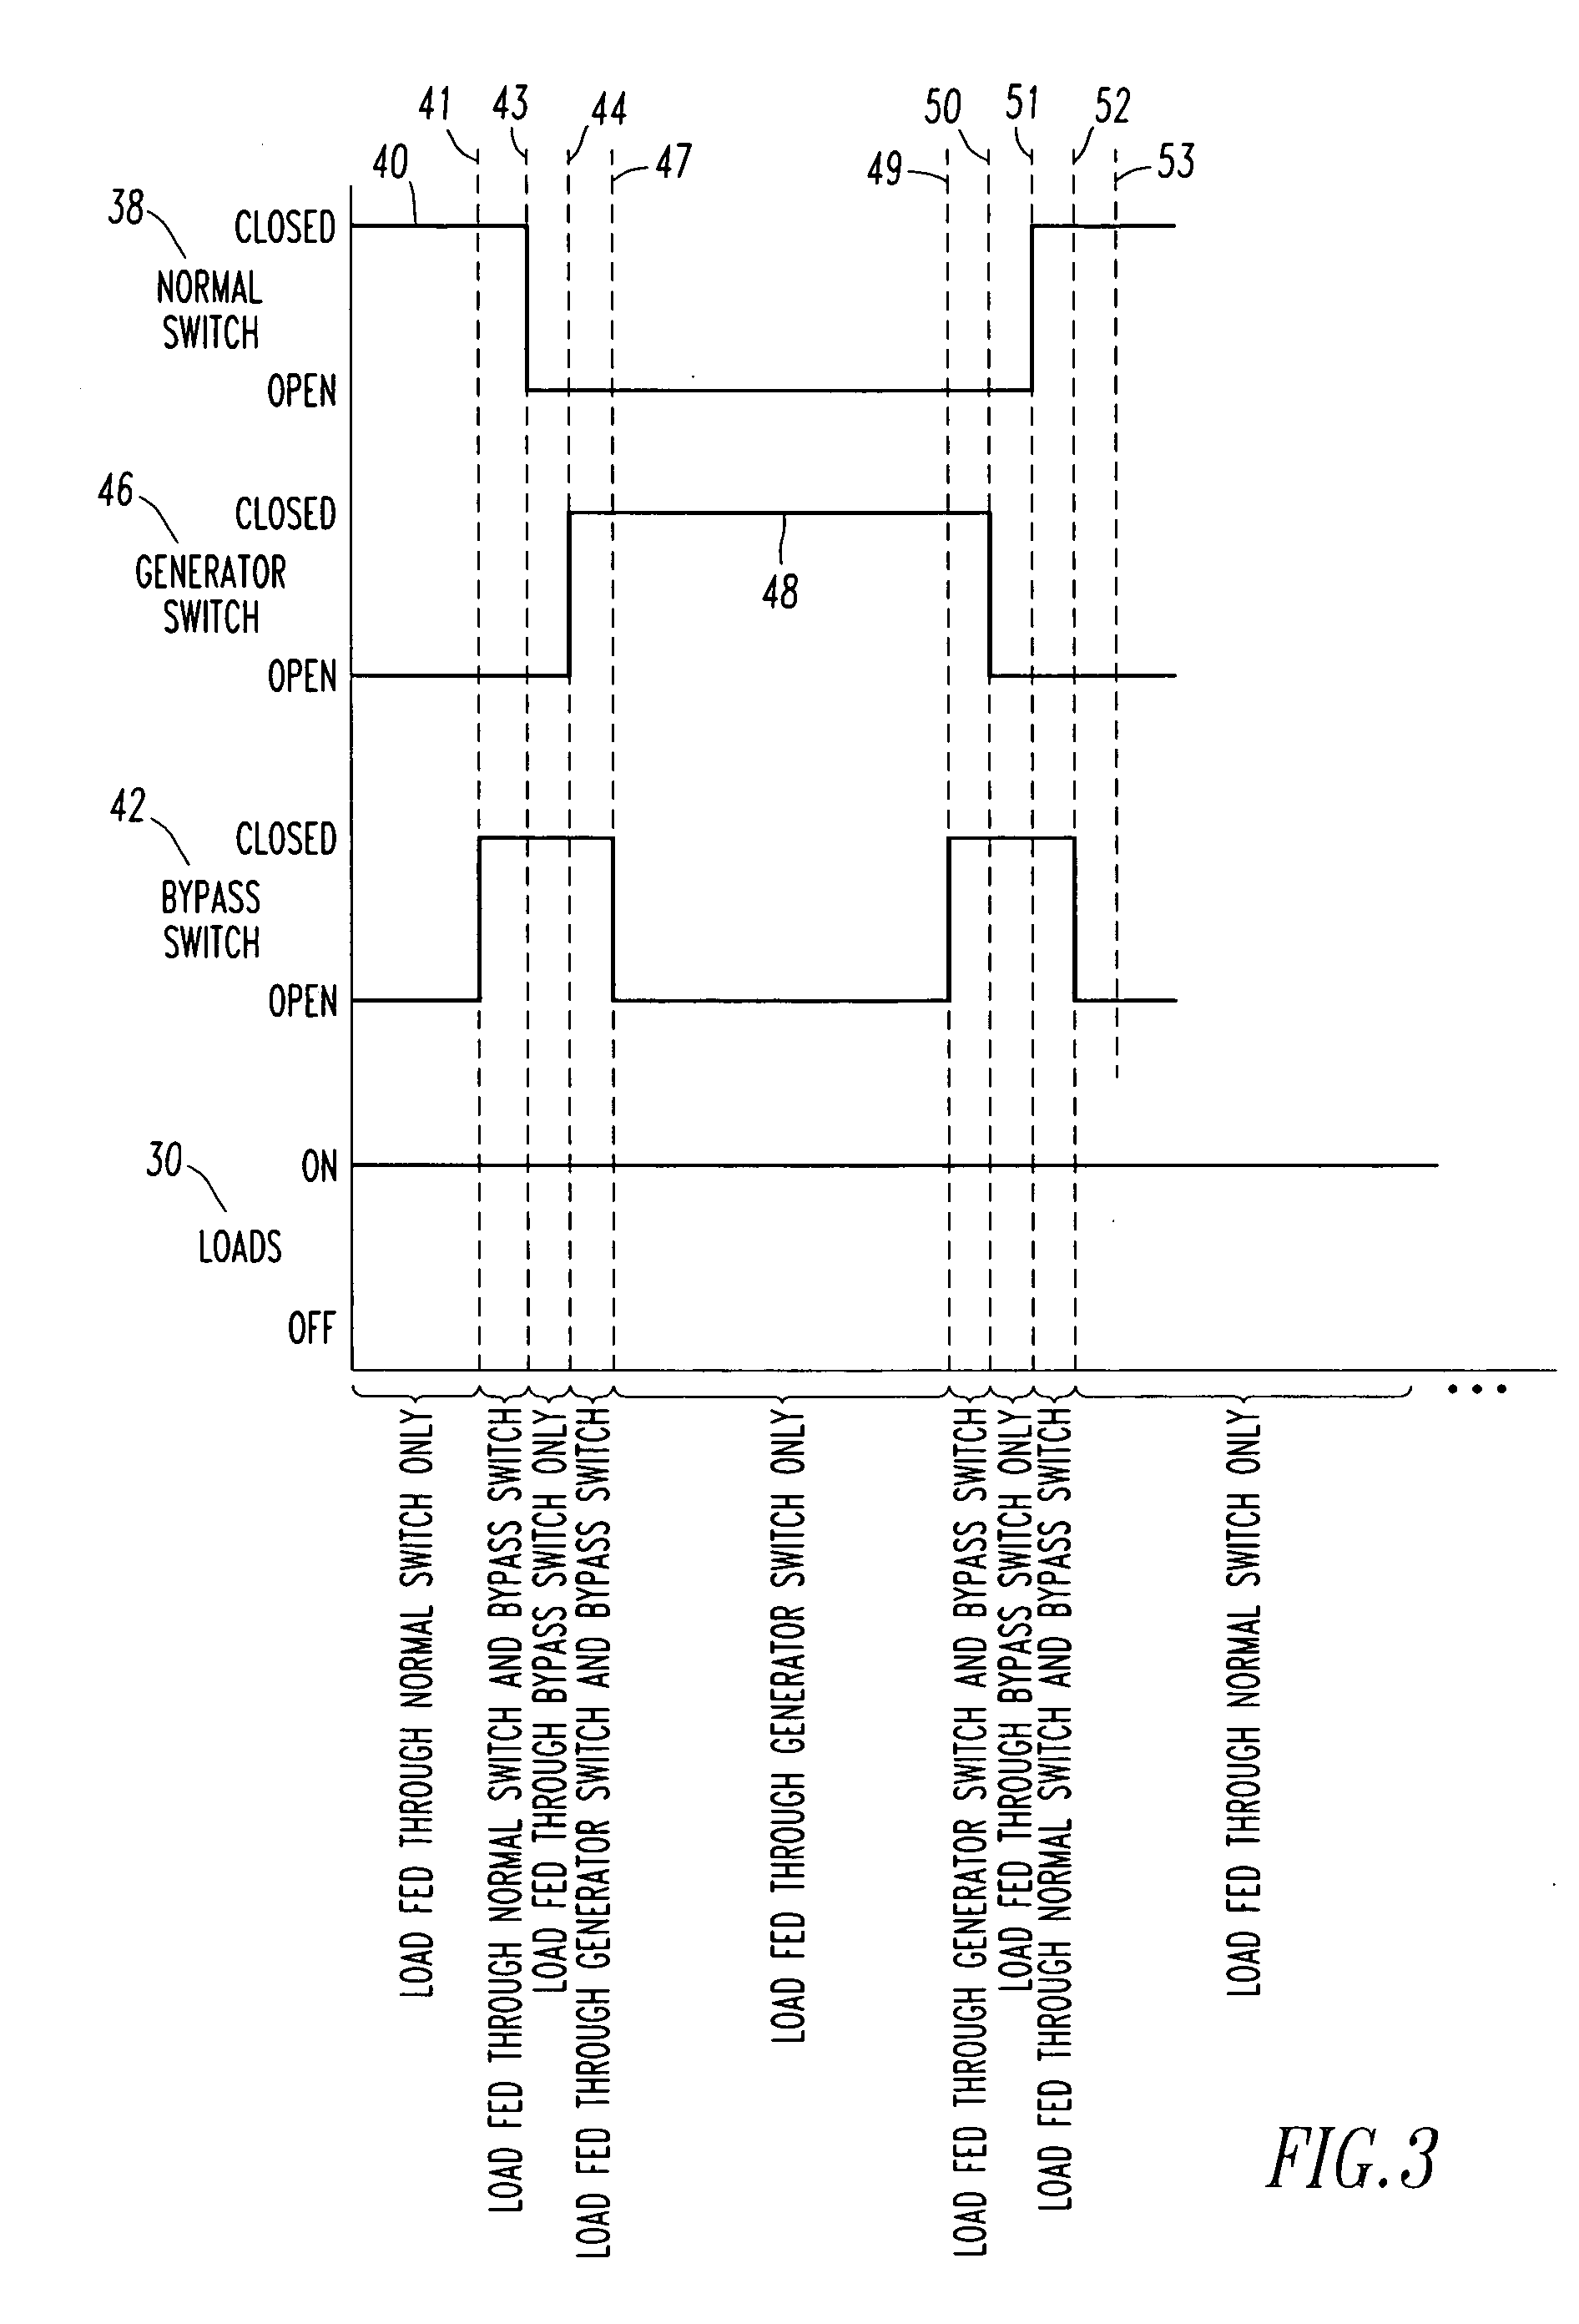 Retrofit kit for converting a transfer switch to a switch for soft-load transfer, and soft-load power distribution system and method